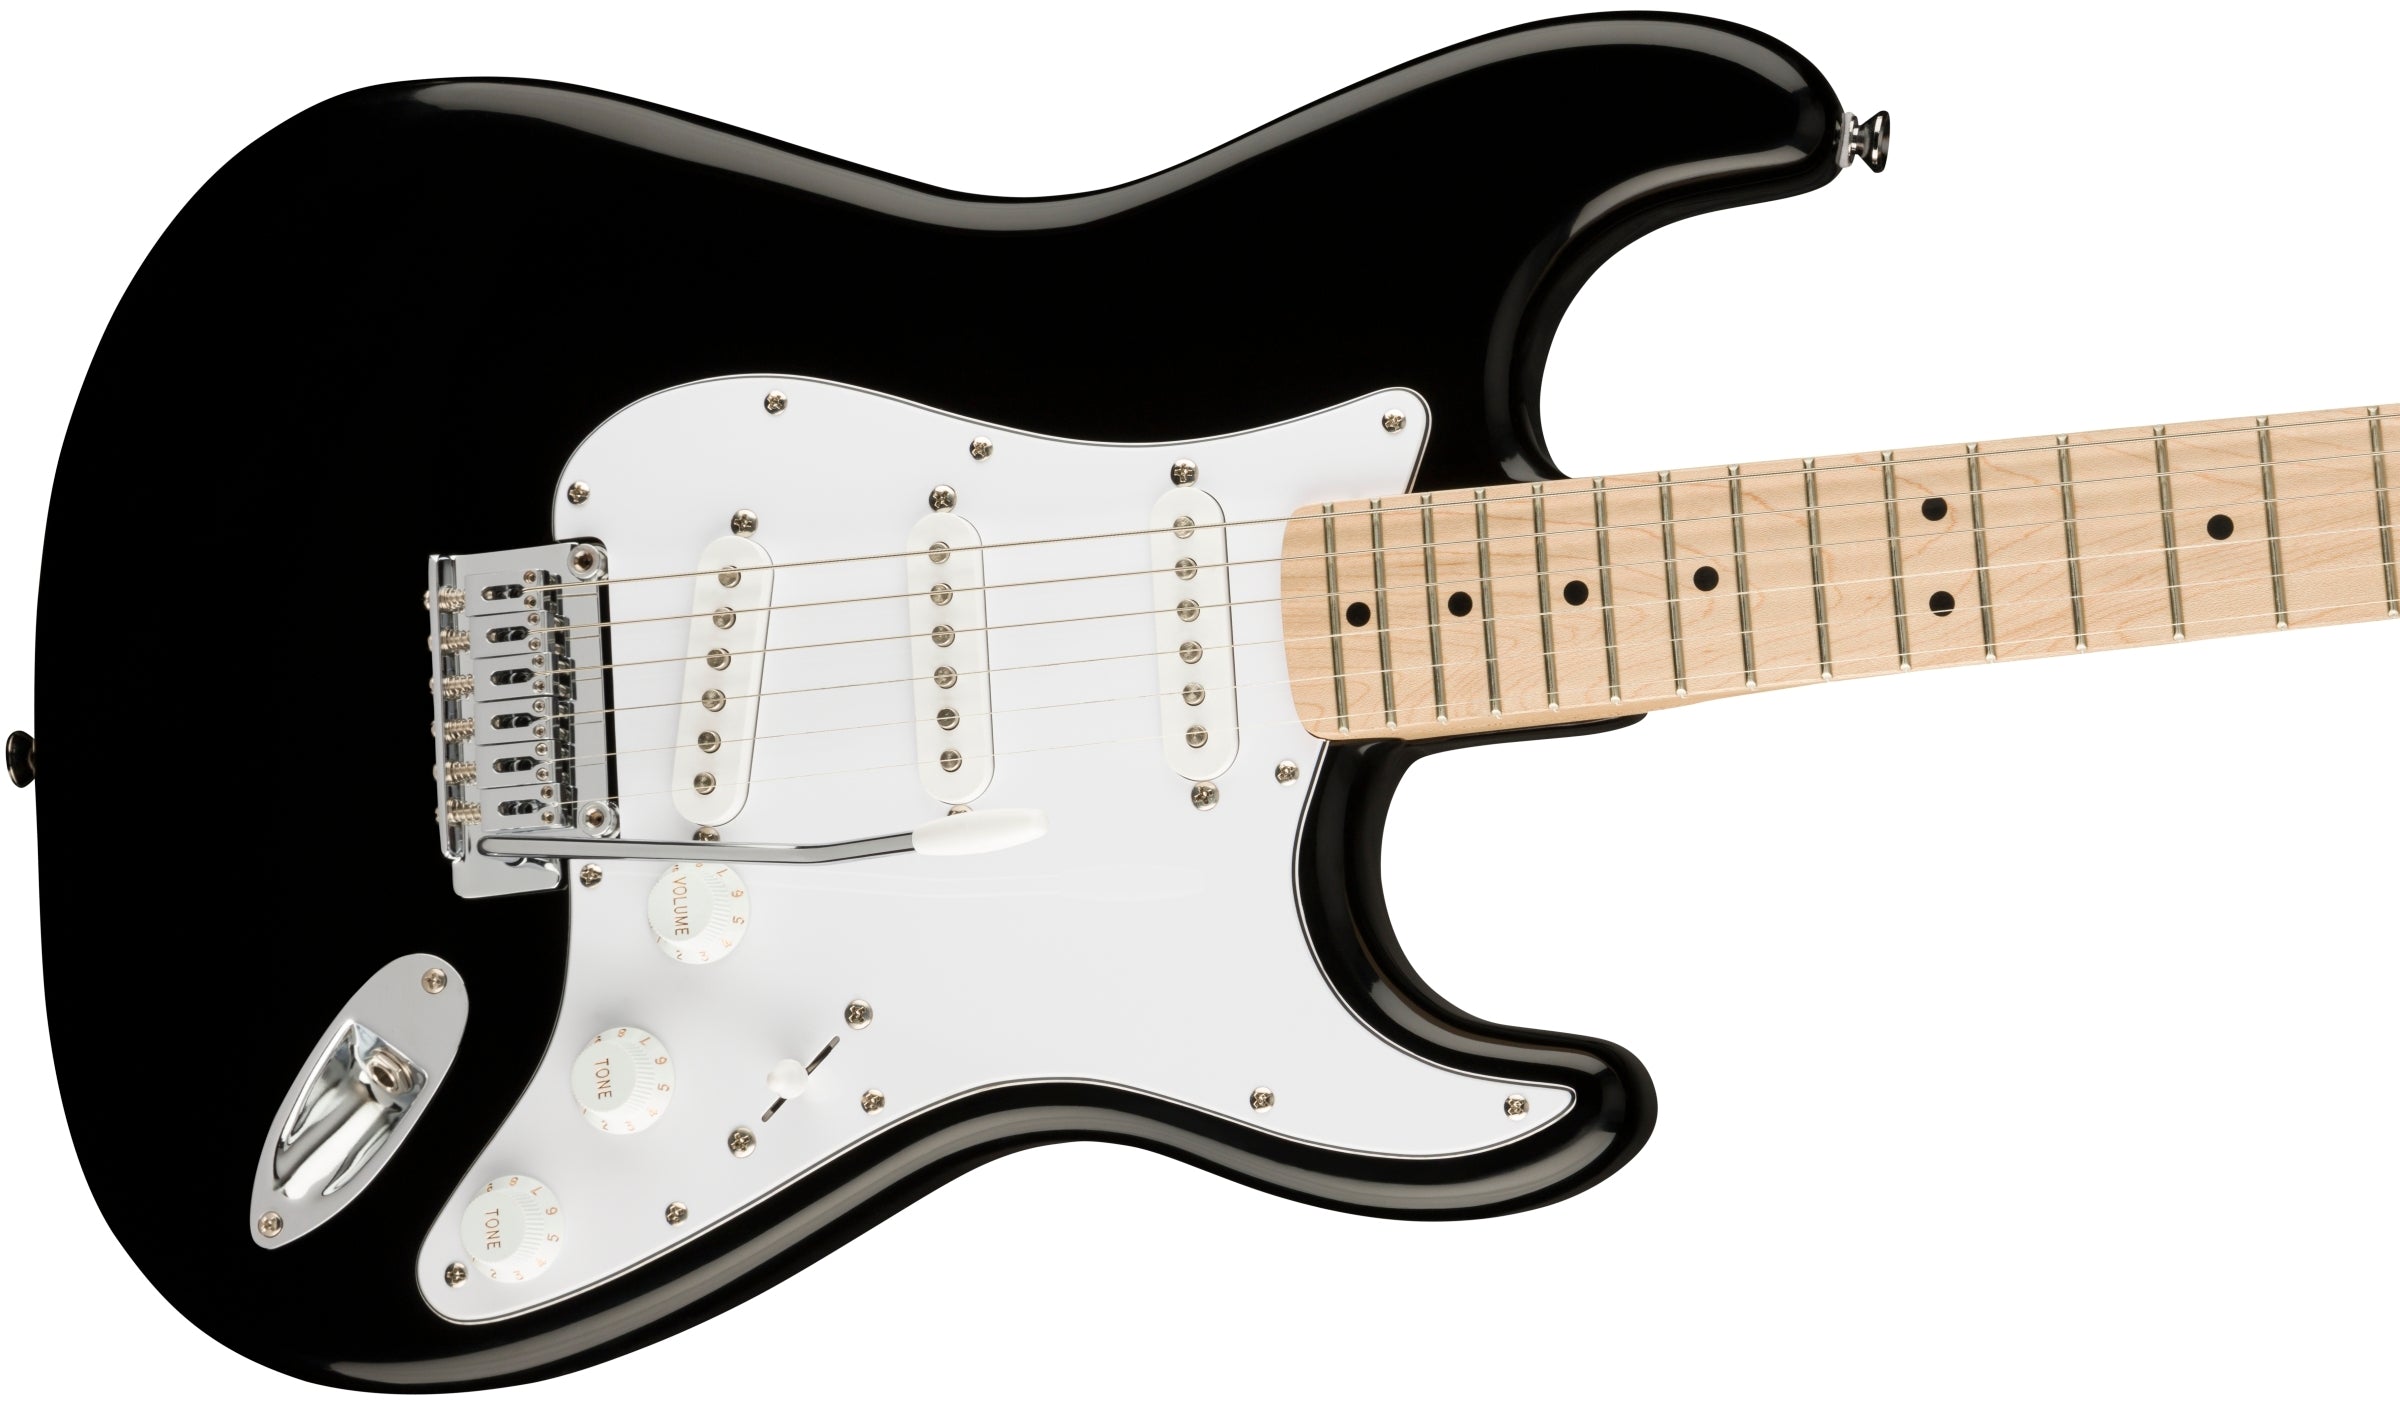 Squier Affinity Series Stratocaster Electric Guitar - Black